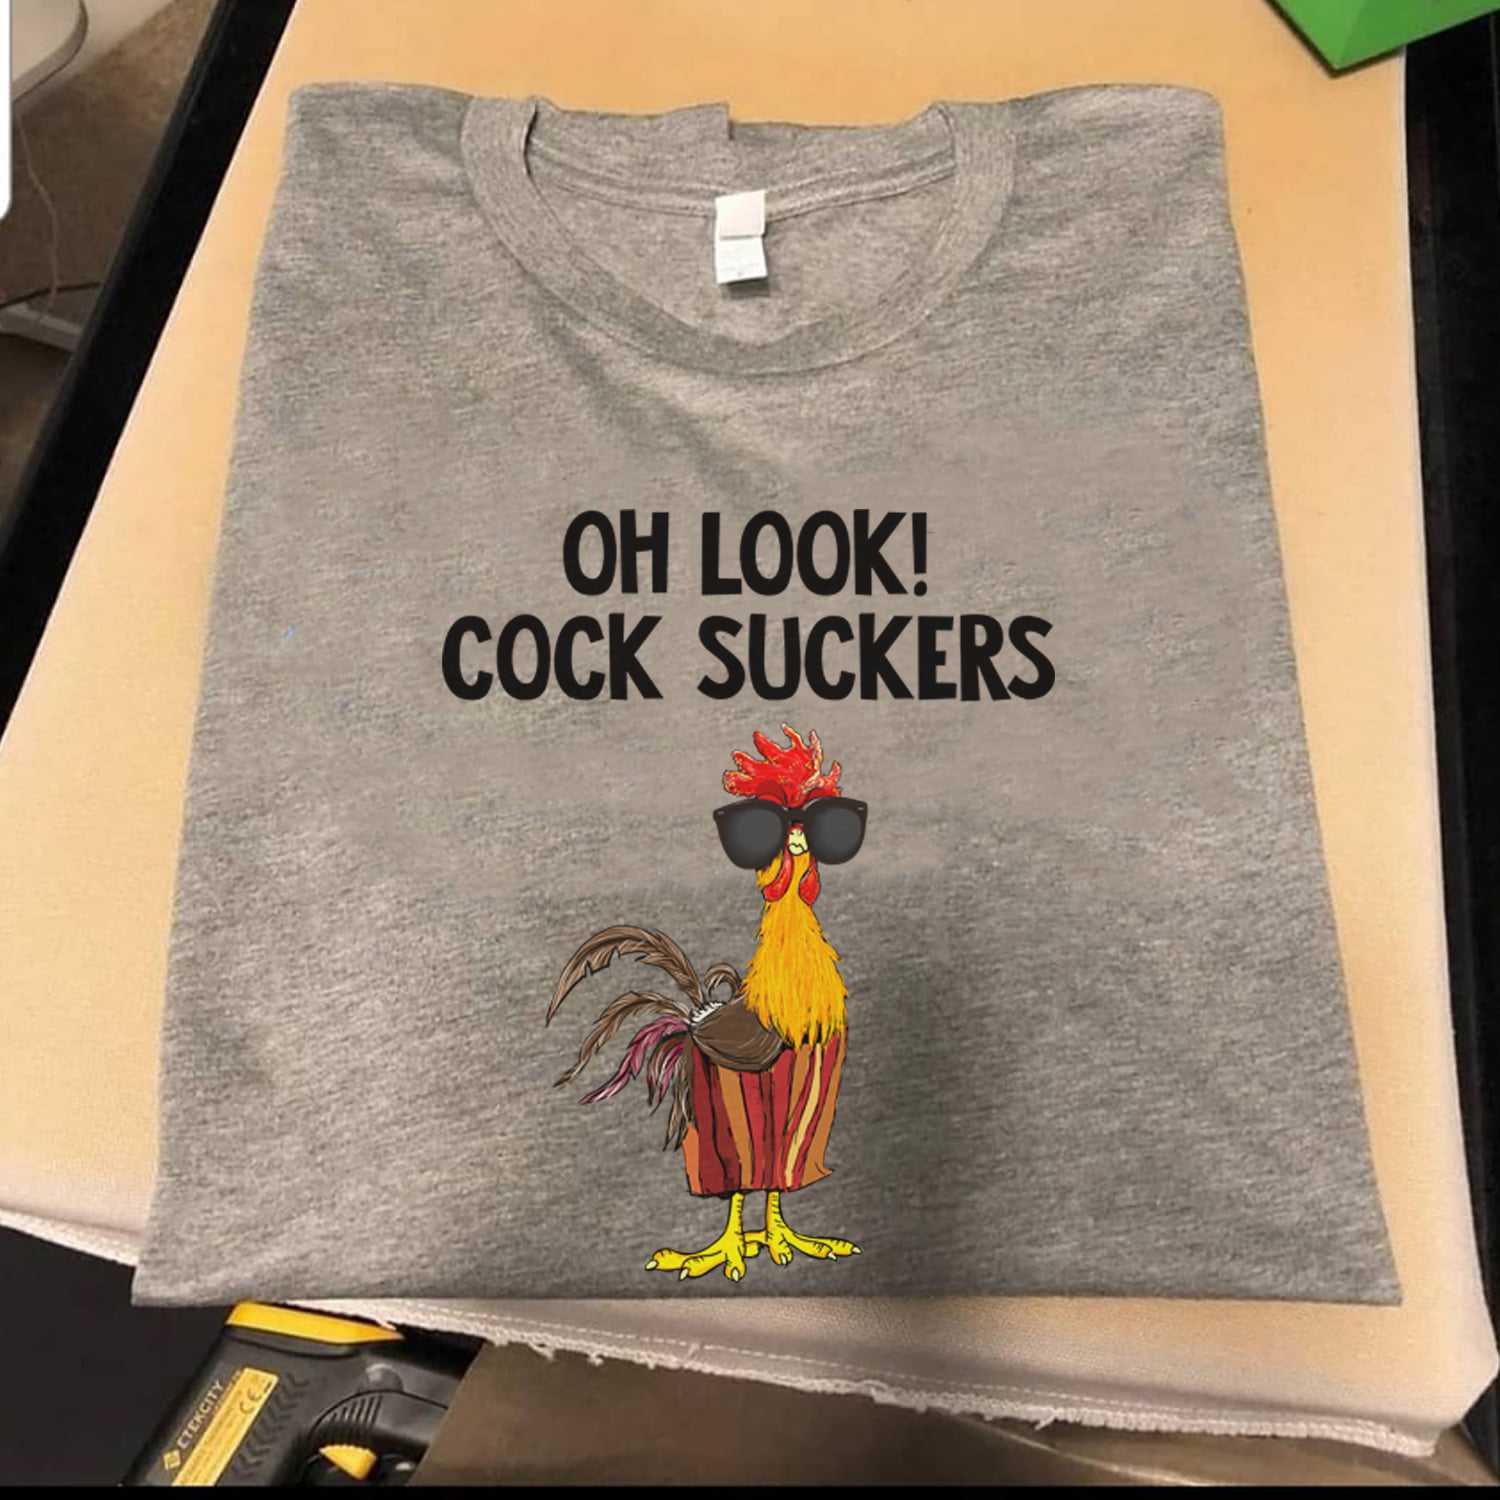 Oh look! Cock suckers - Chicken with sunglasses, cool chicken animal